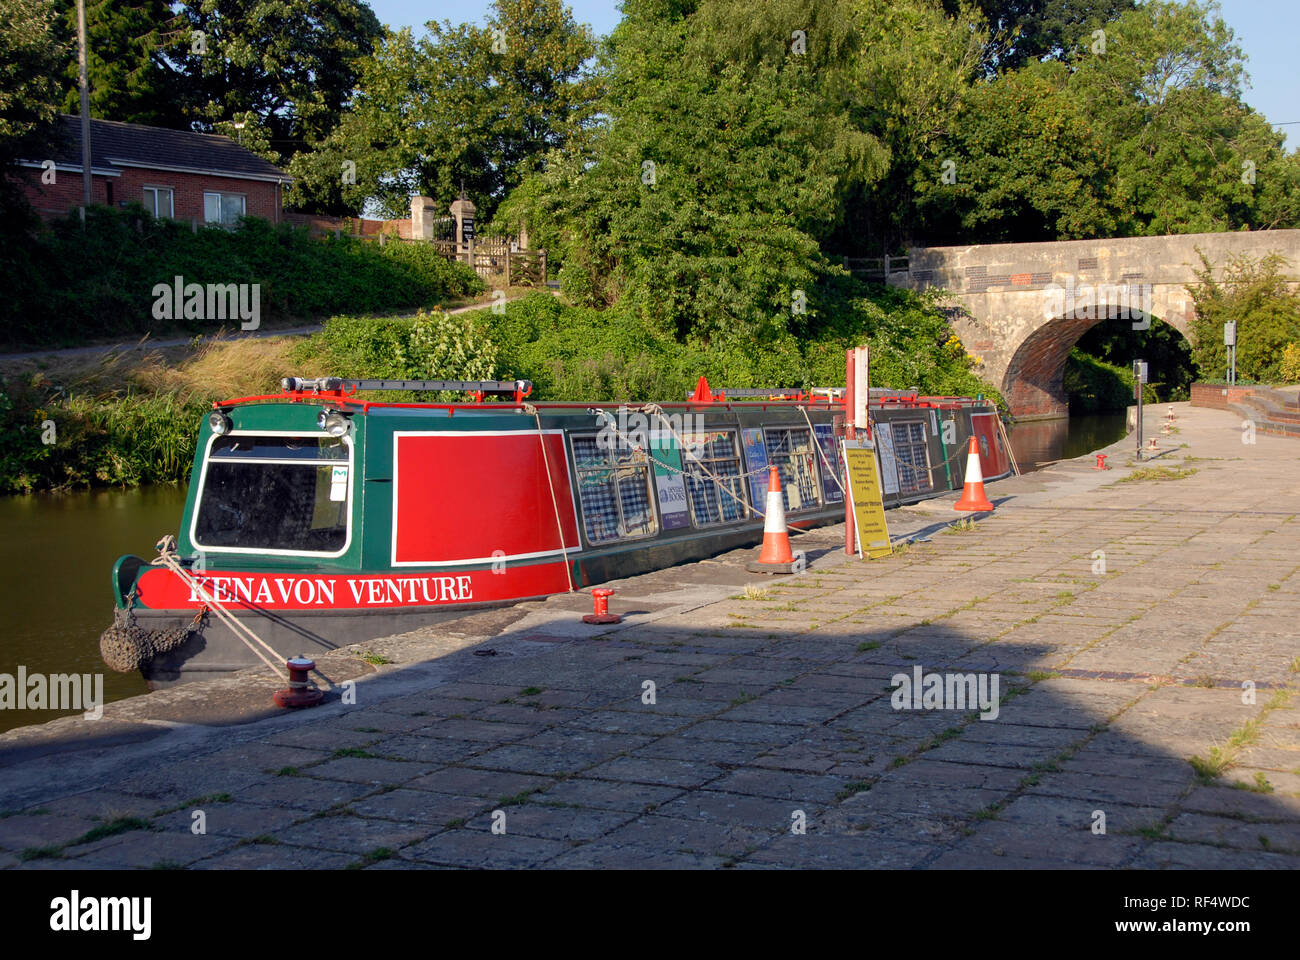 Kenavon Venture barge moored at Devizes, Wiltshire, England, awaiting passengers for next boat trip Stock Photo